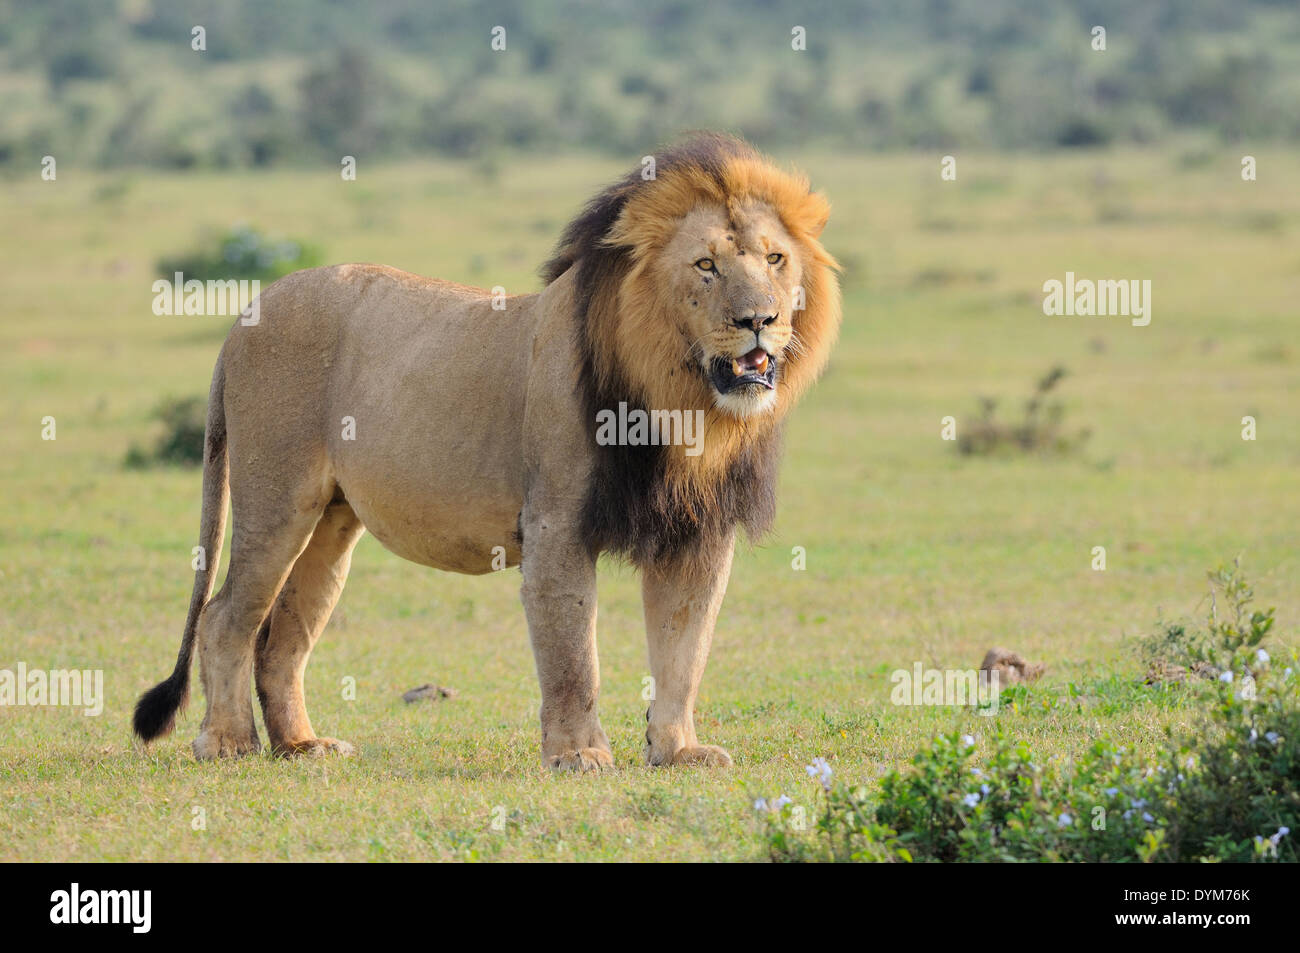 Lion (Panthera leo), standing in green grass, alert, Addo National Park, Eastern Cape, South Africa, Africa Stock Photo